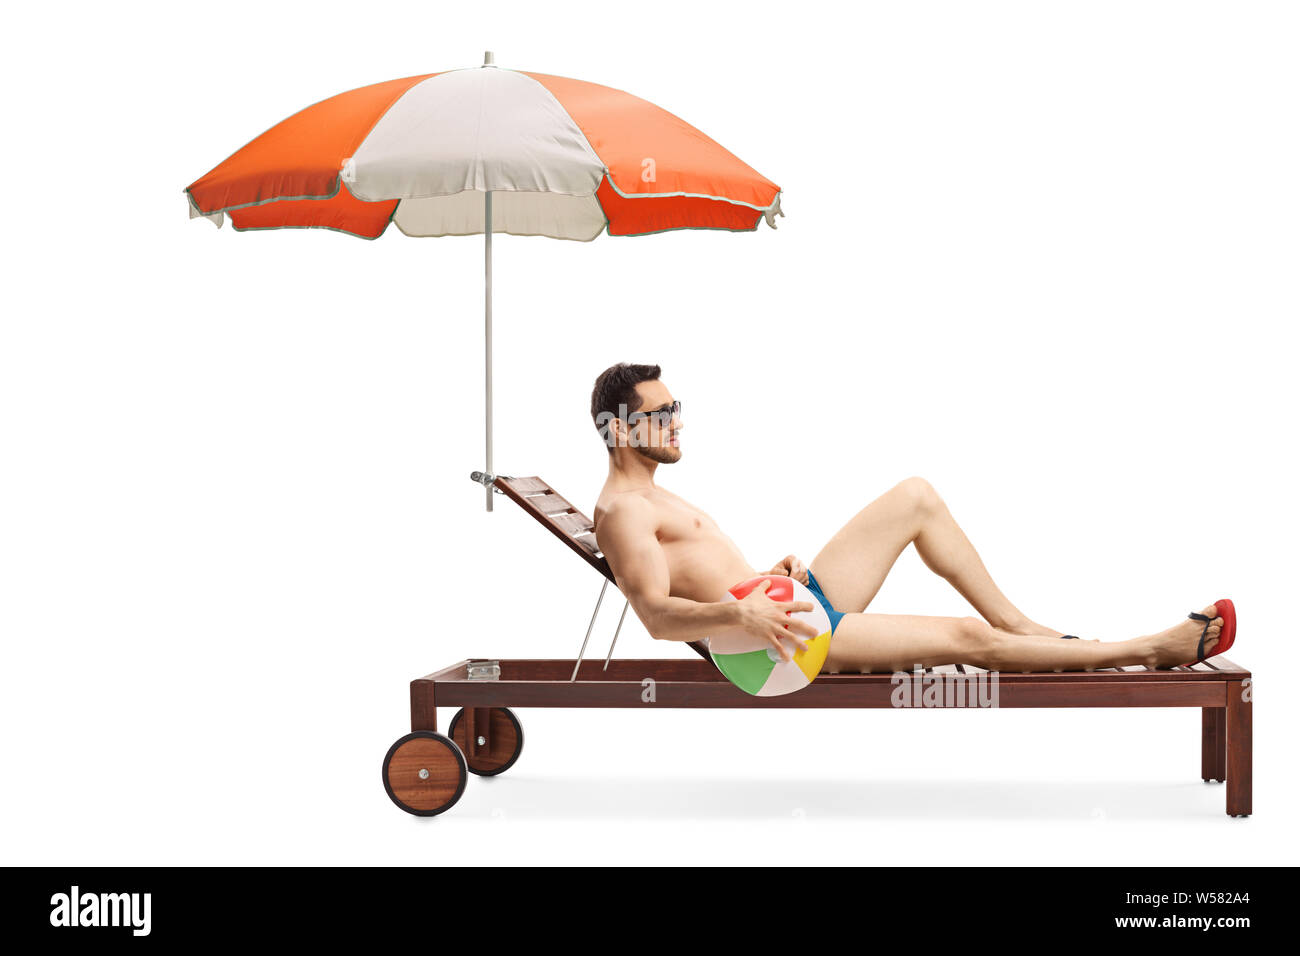 Full length shot of a young man on a sunbed with an umbrella holding an inflatable ball isolated on white background Stock Photo